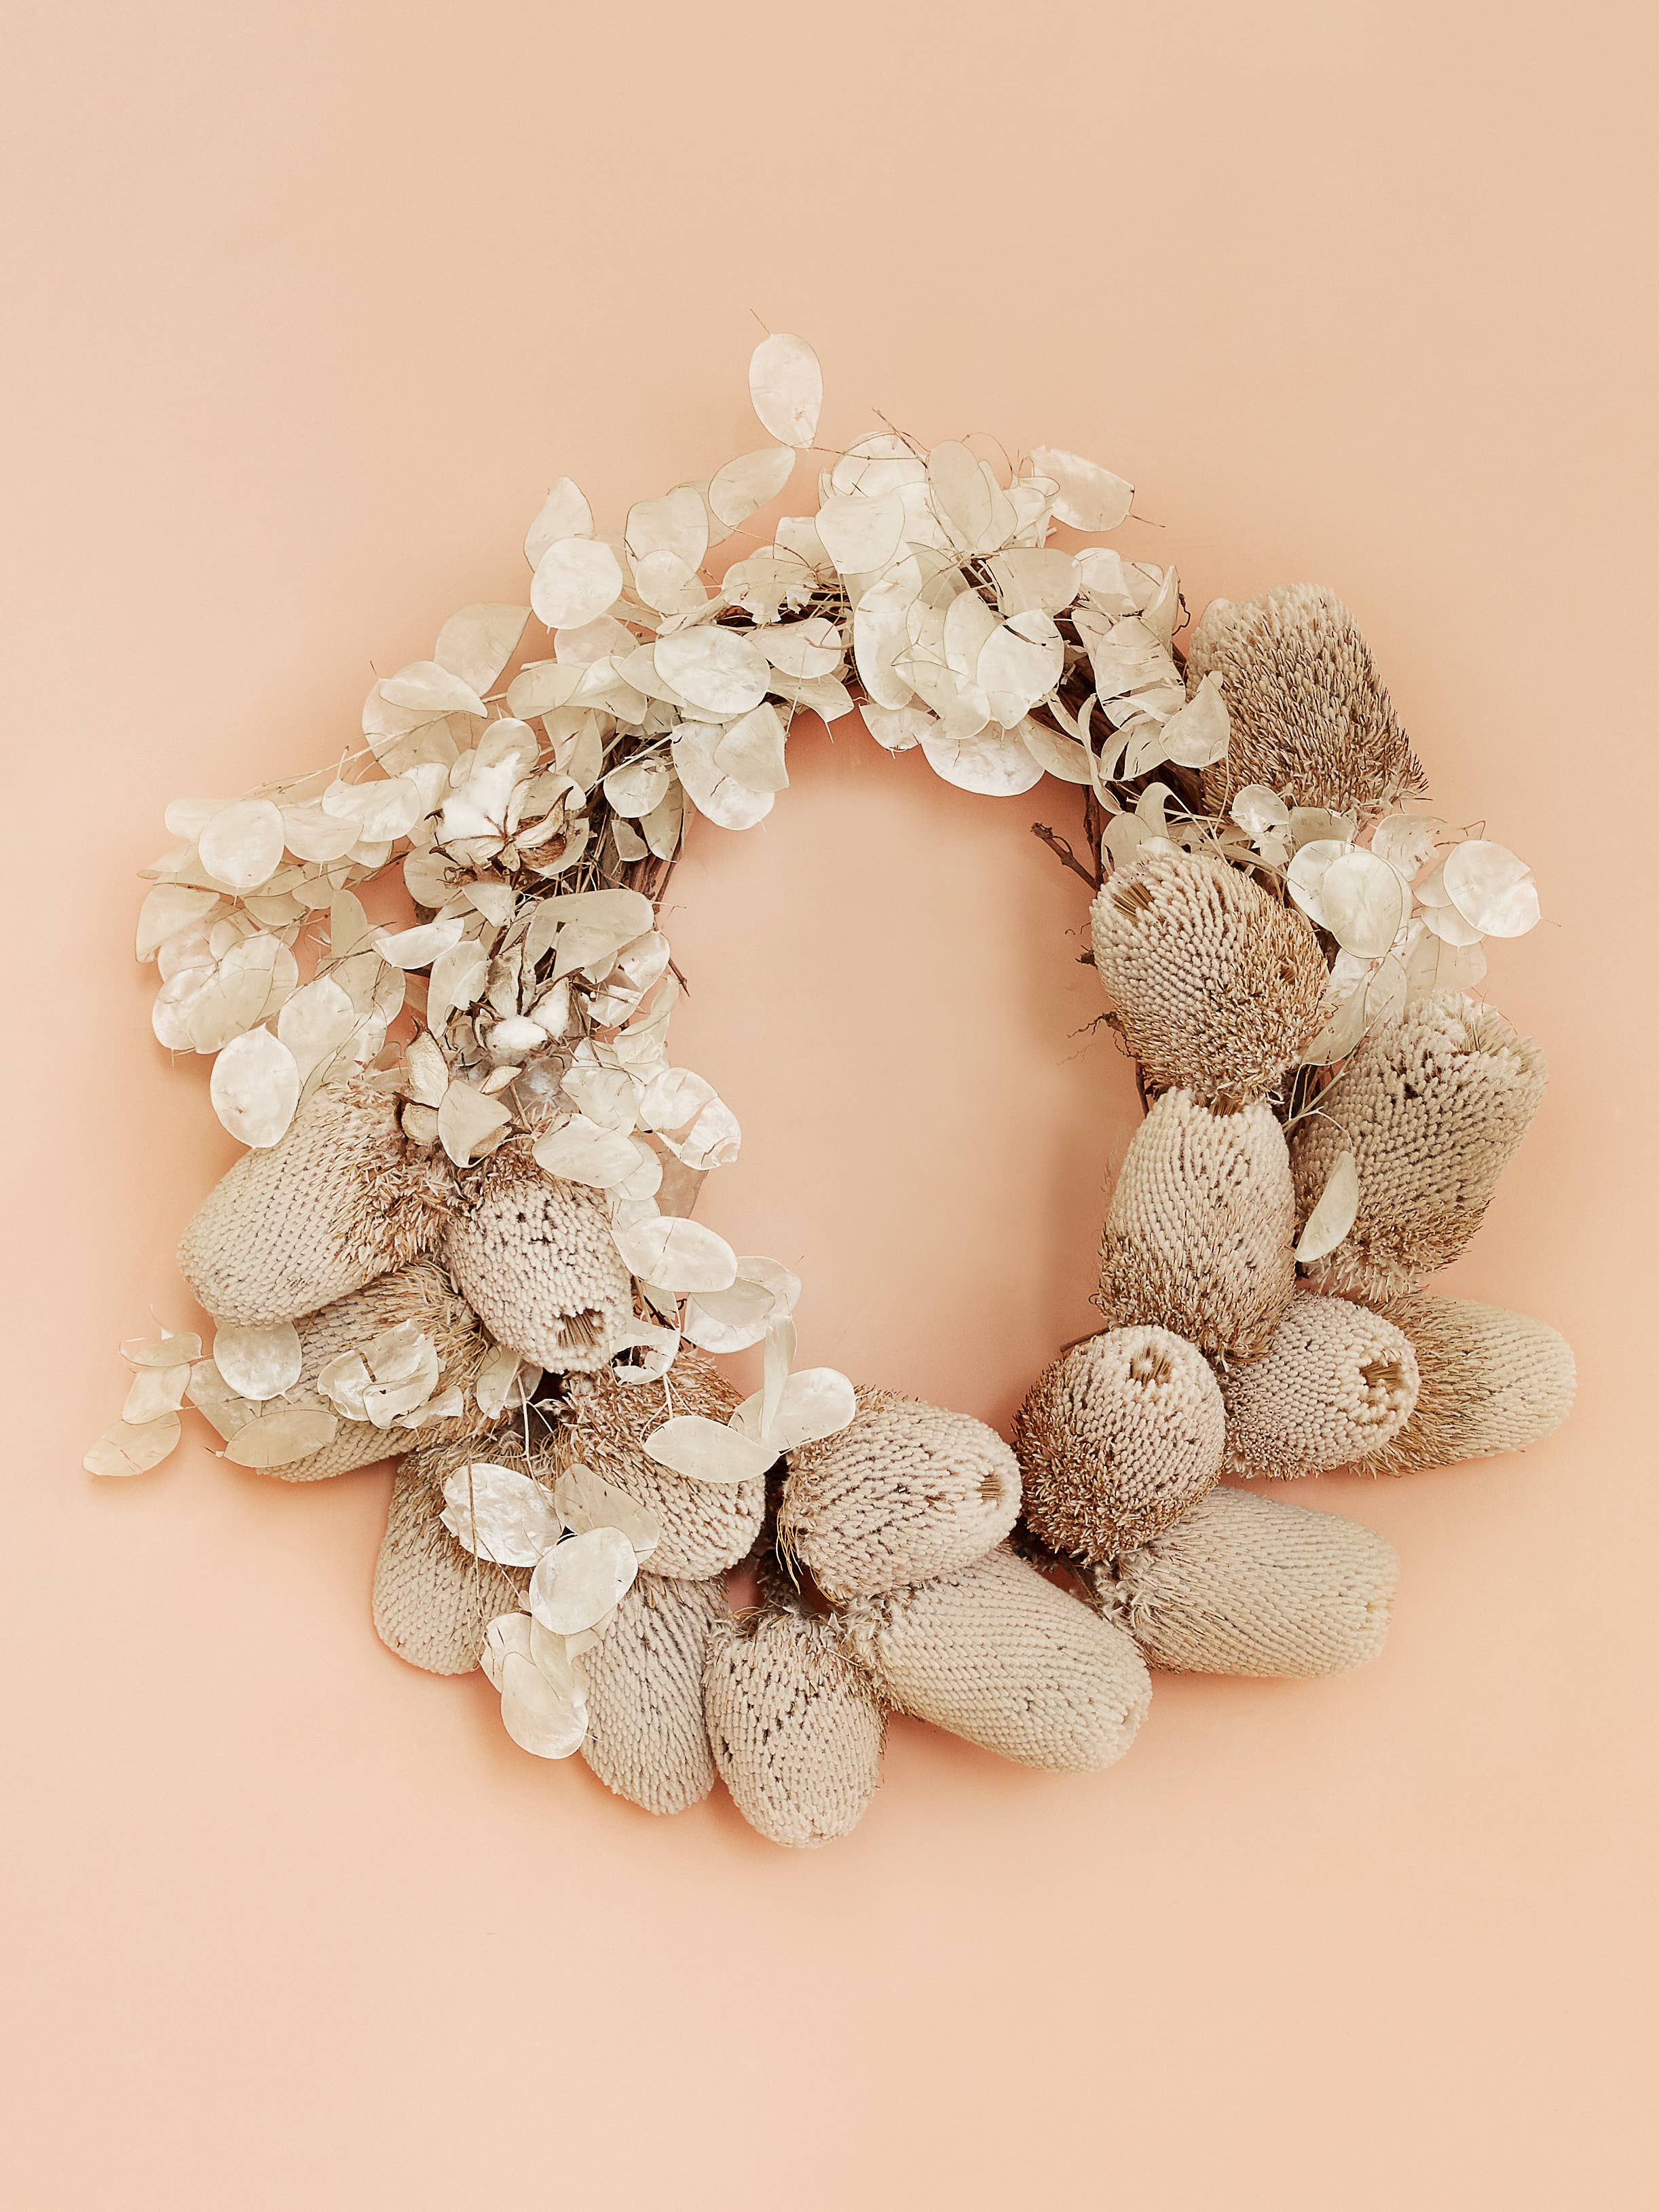 We Asked 7 Florists to Make Us Their Best Winter Wreaths